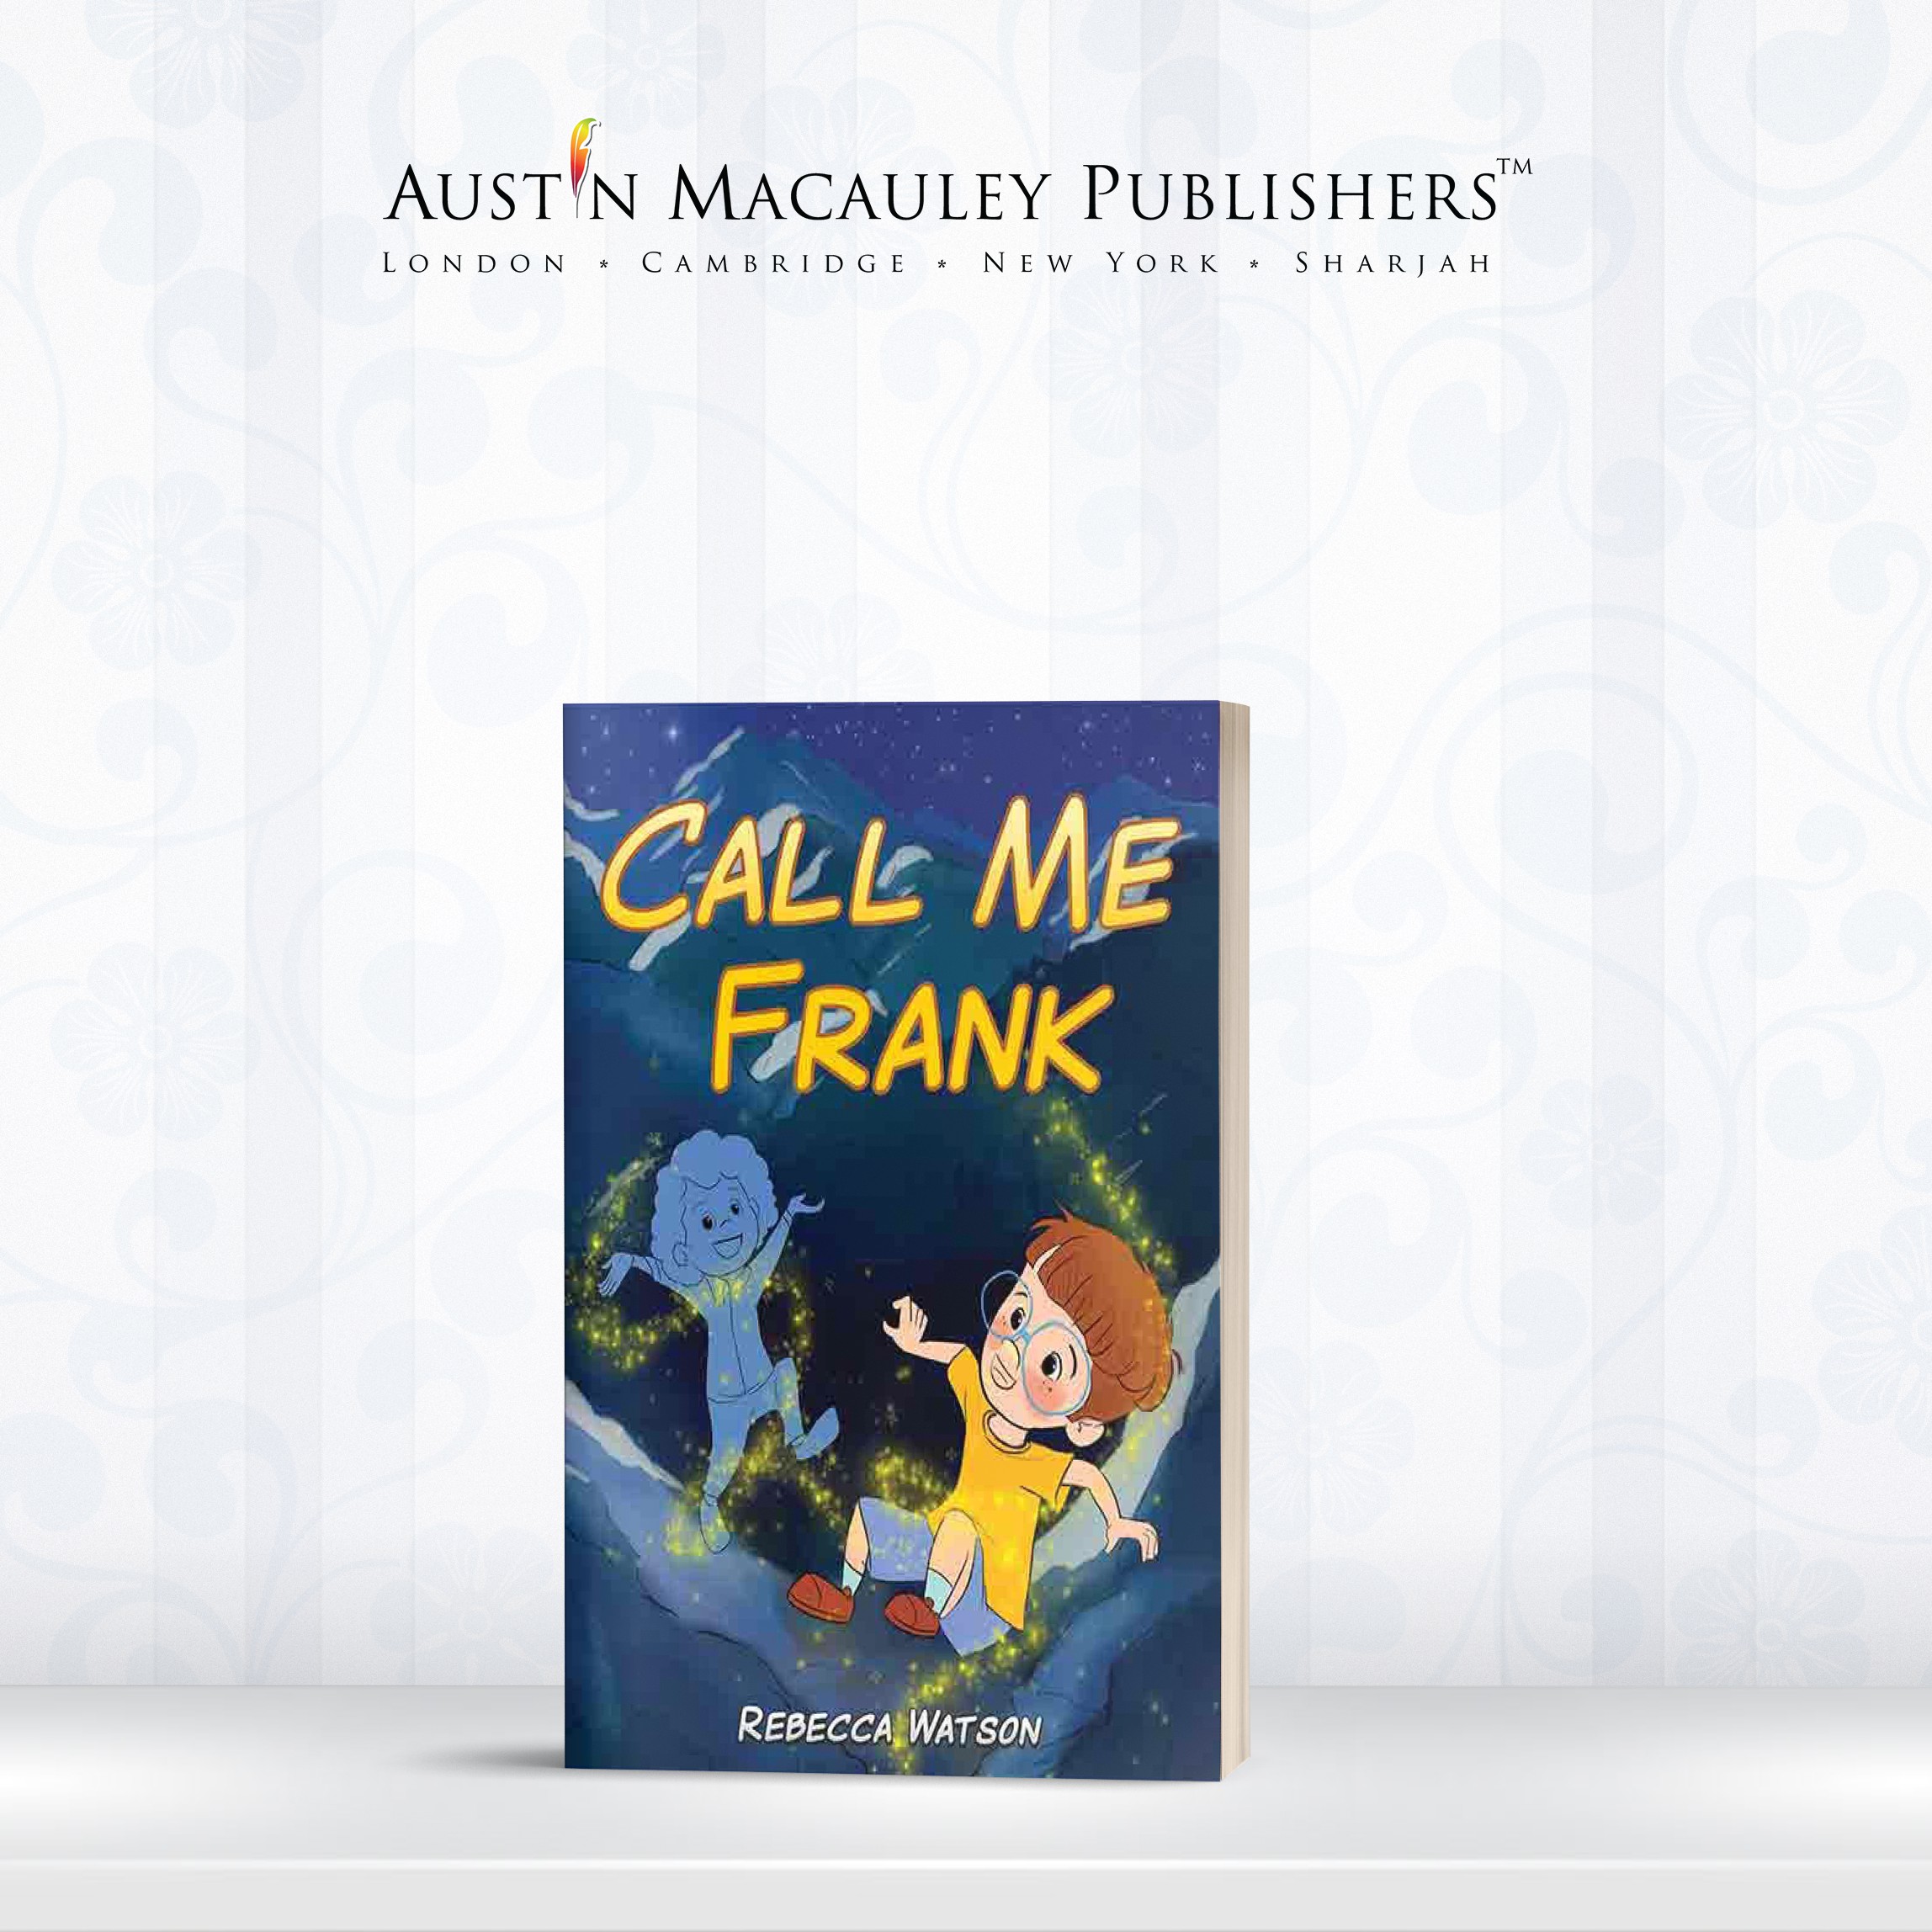 Call Me Frank by Rebecca Watson Gets An Exciting Review By Glam Adelaide